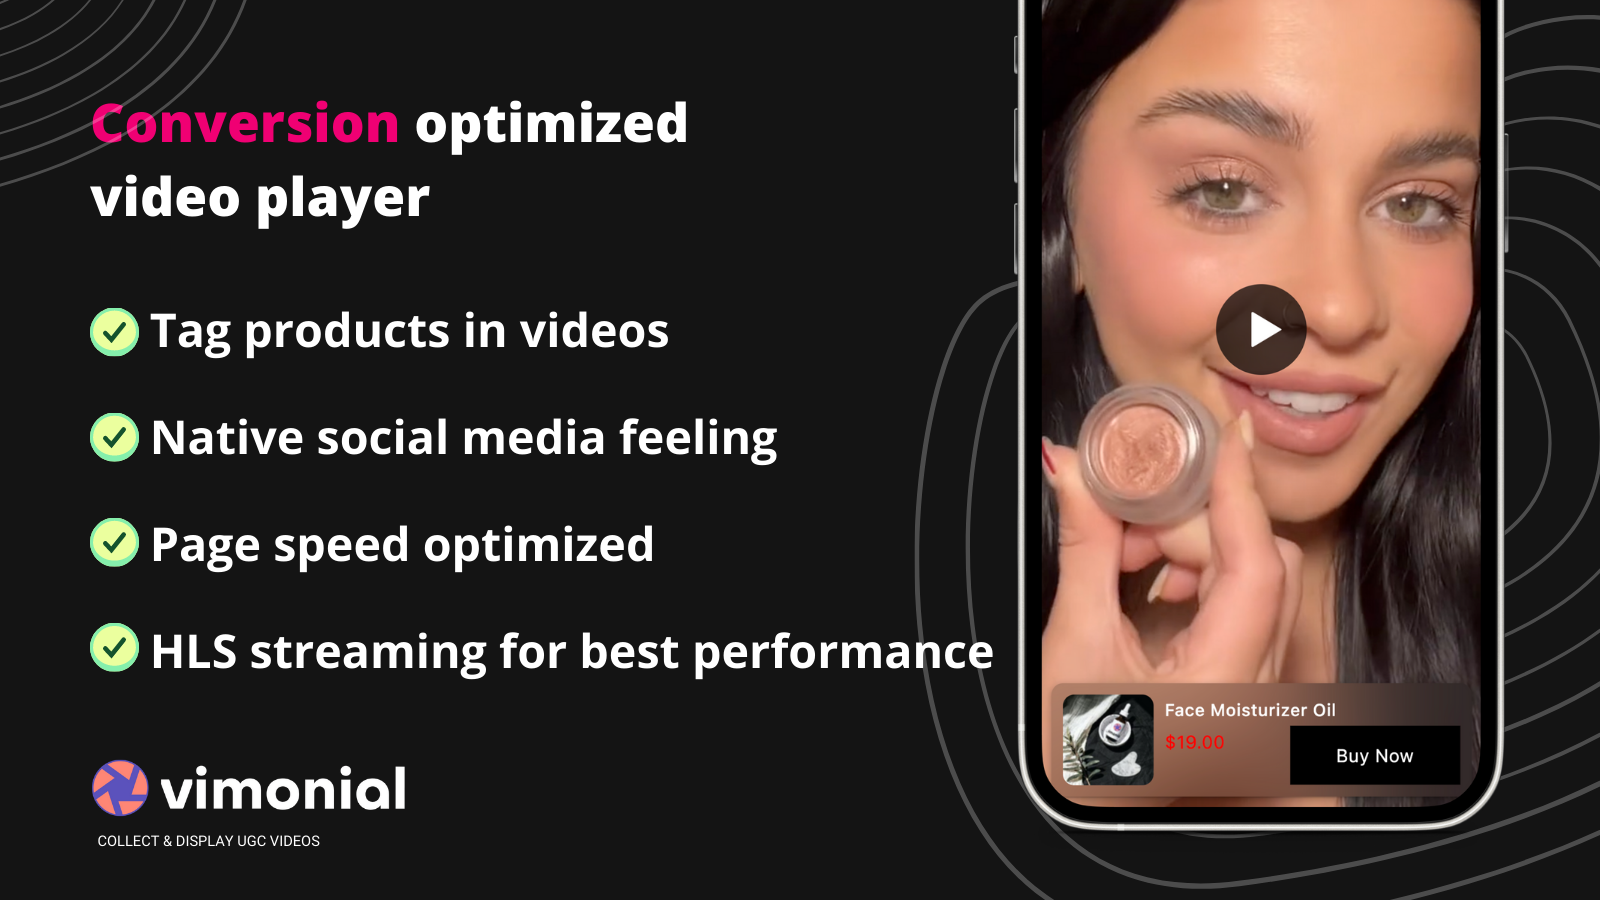 Embed Videos with conversion optimized video player